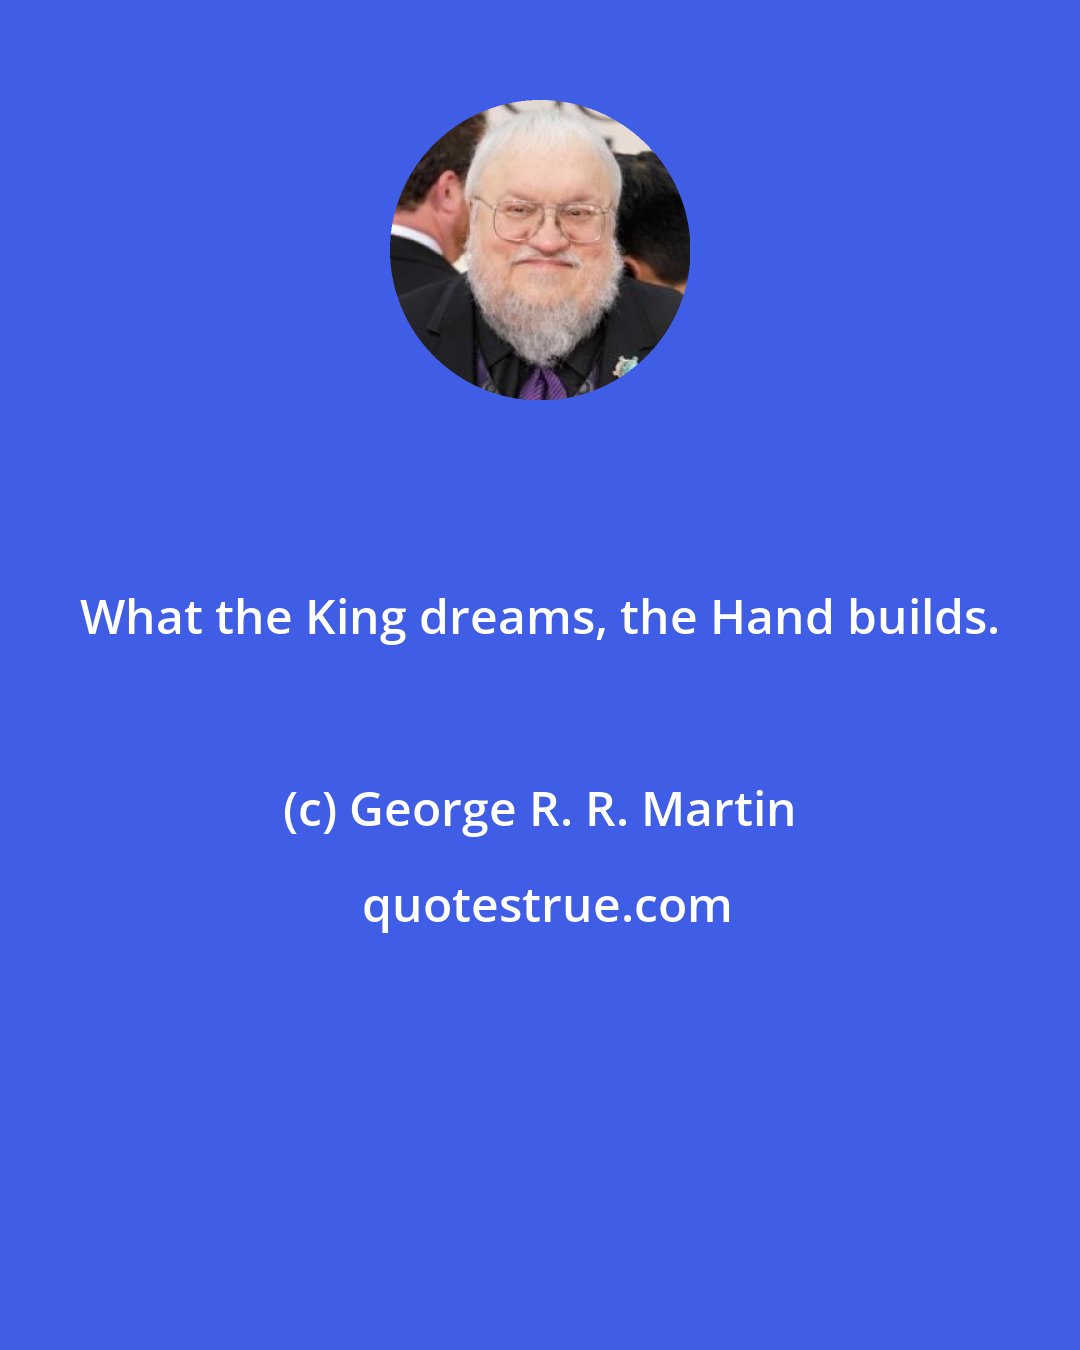 George R. R. Martin: What the King dreams, the Hand builds.